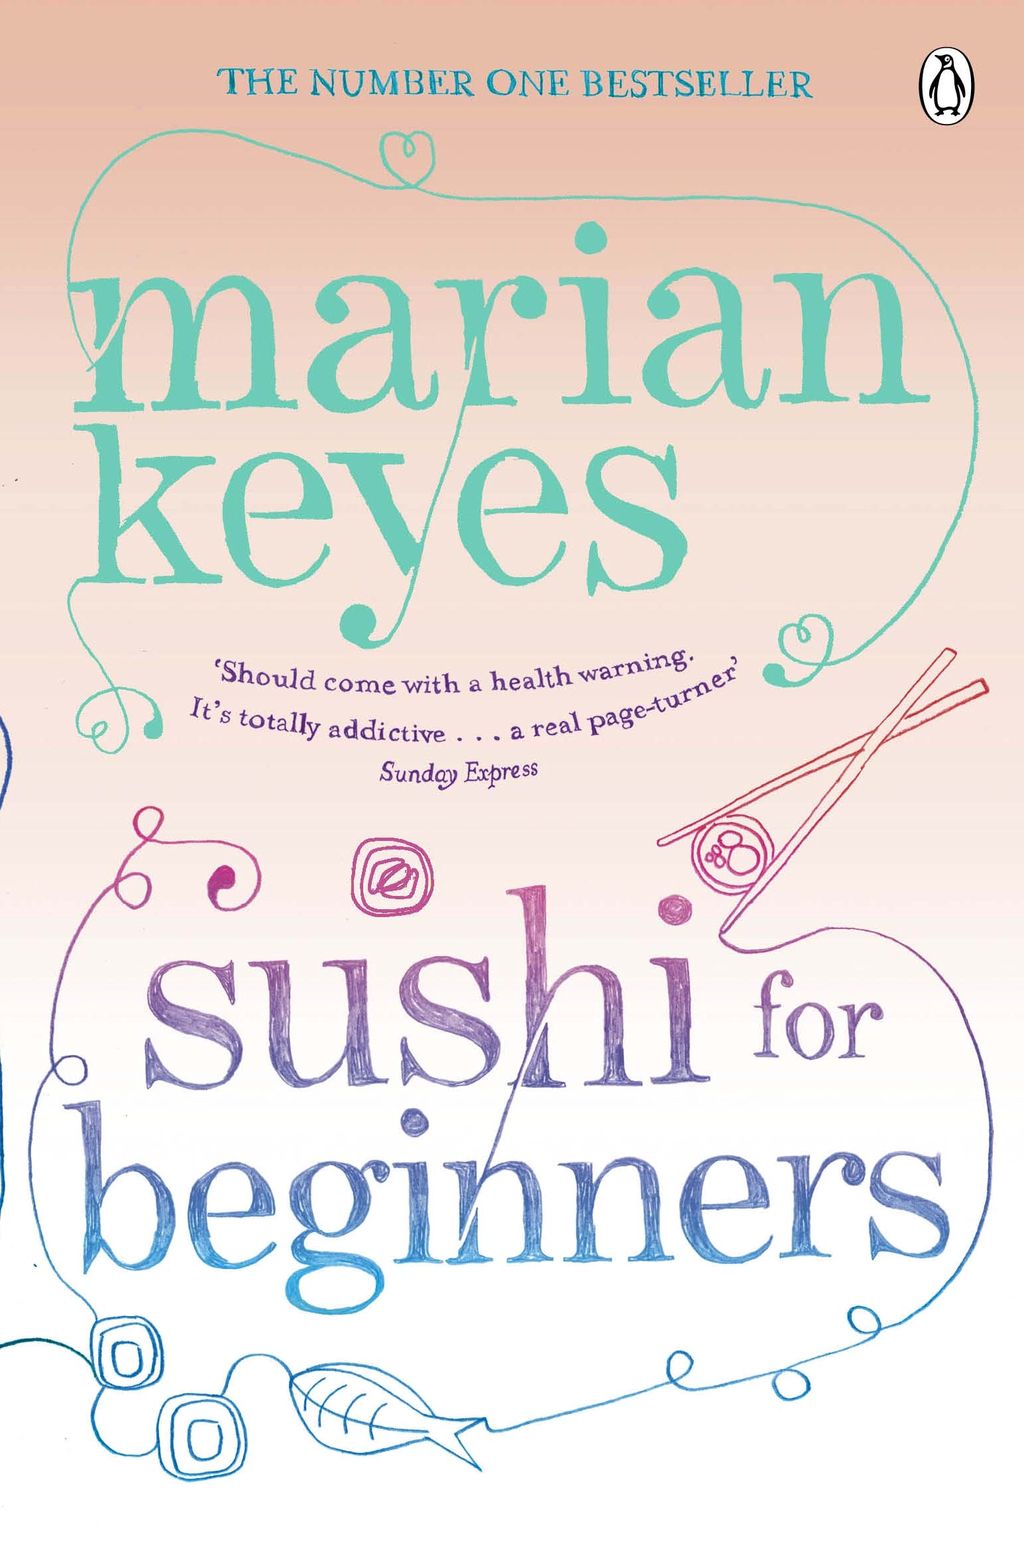 Sushi for Beginners by Marian Keyes